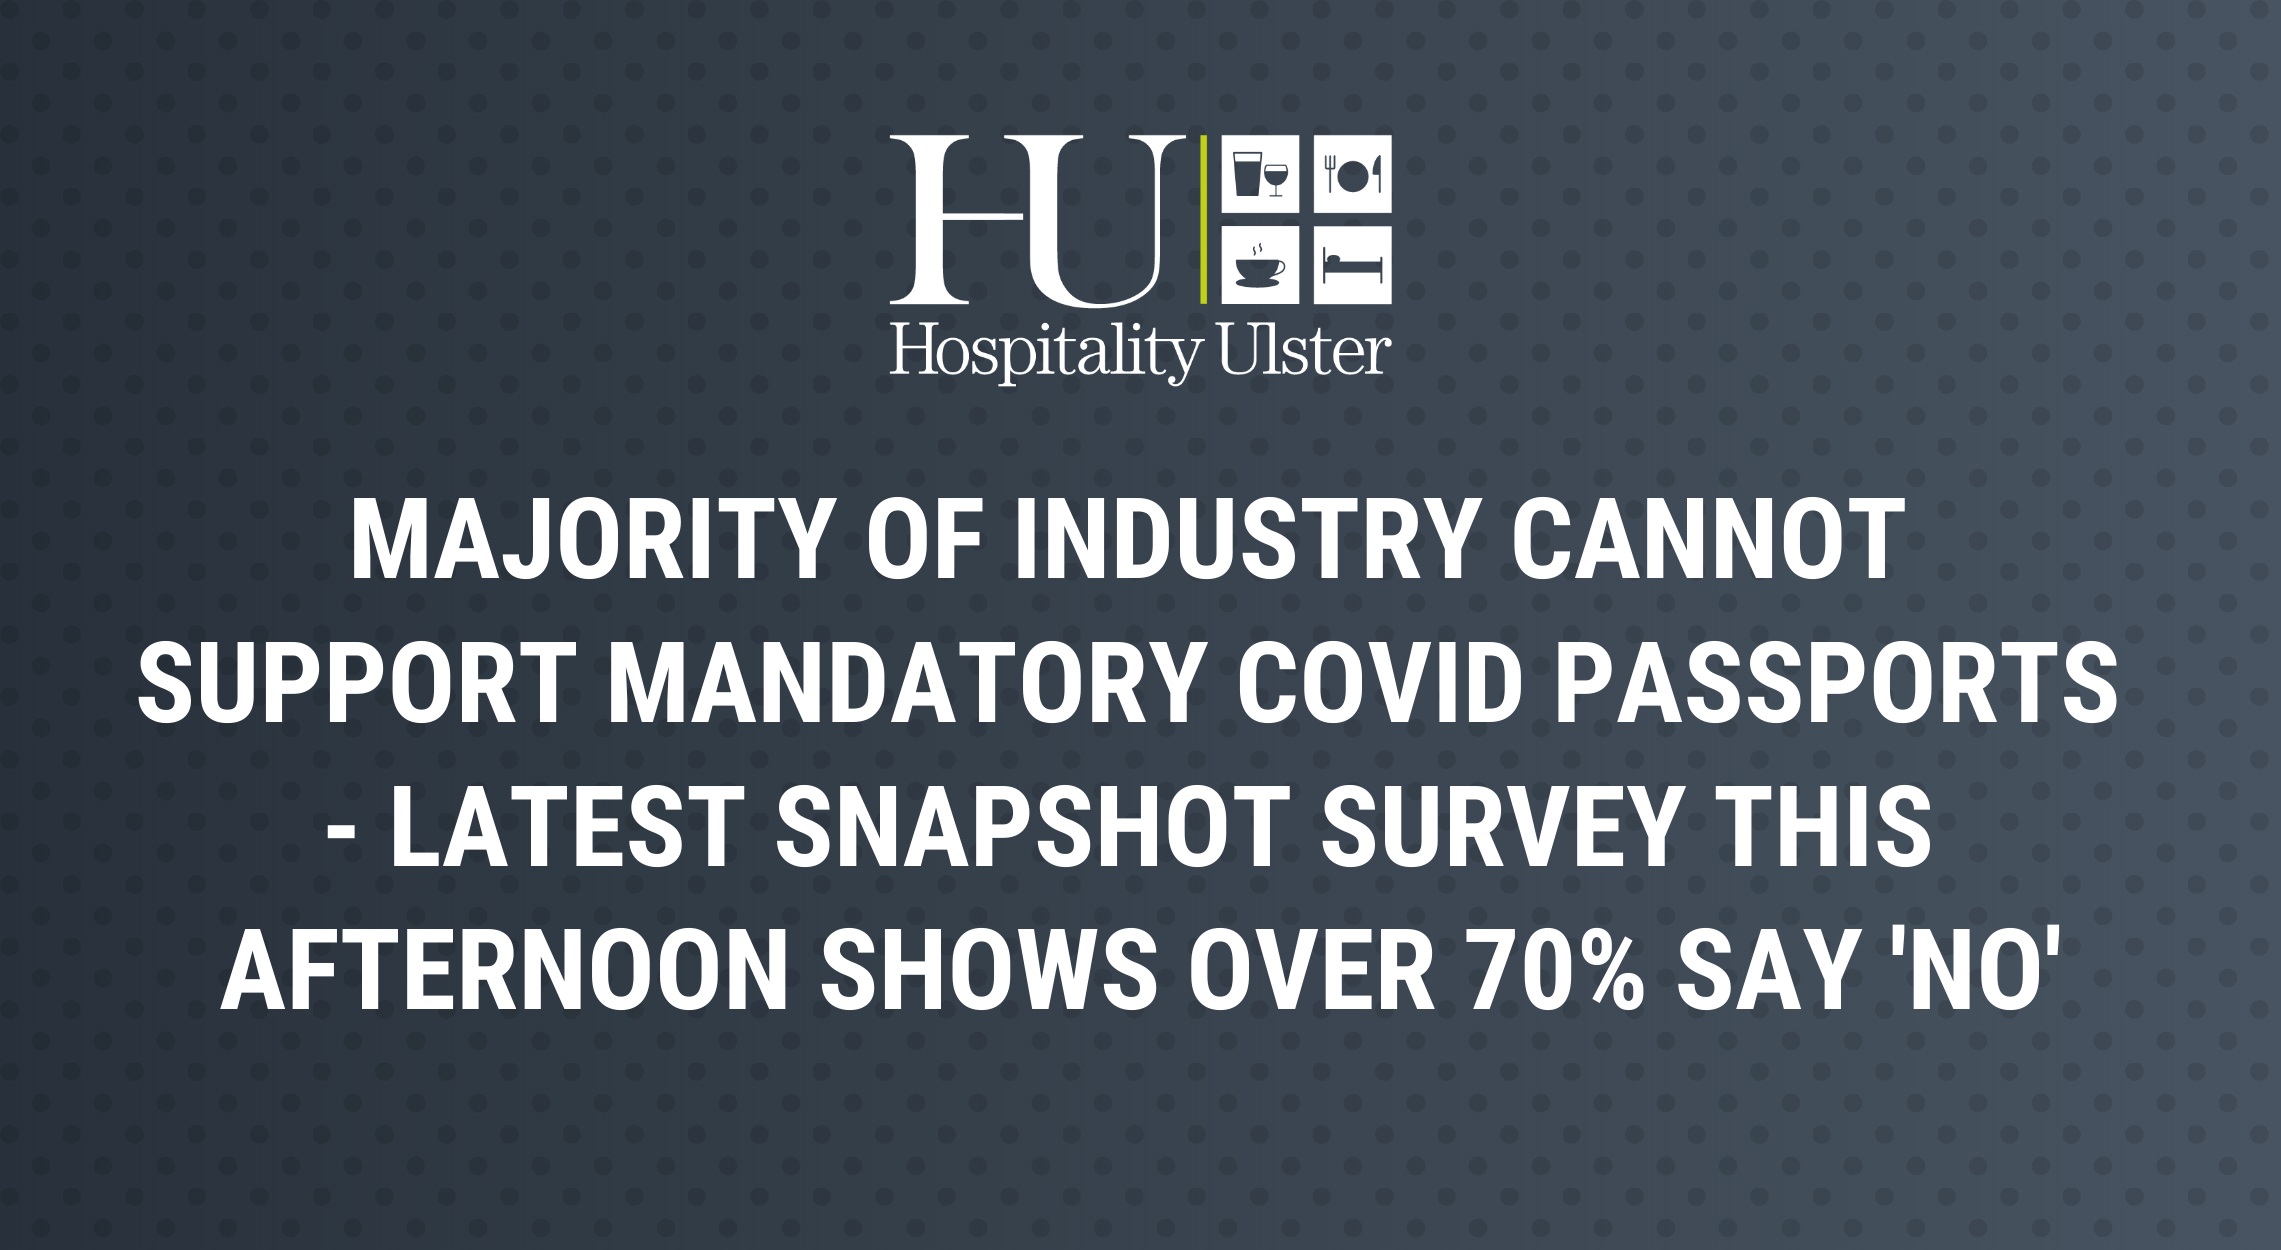 MAJORITY OF INDUSTRY CANNOT SUPPORT MANDATORY COVID PASSPORTS